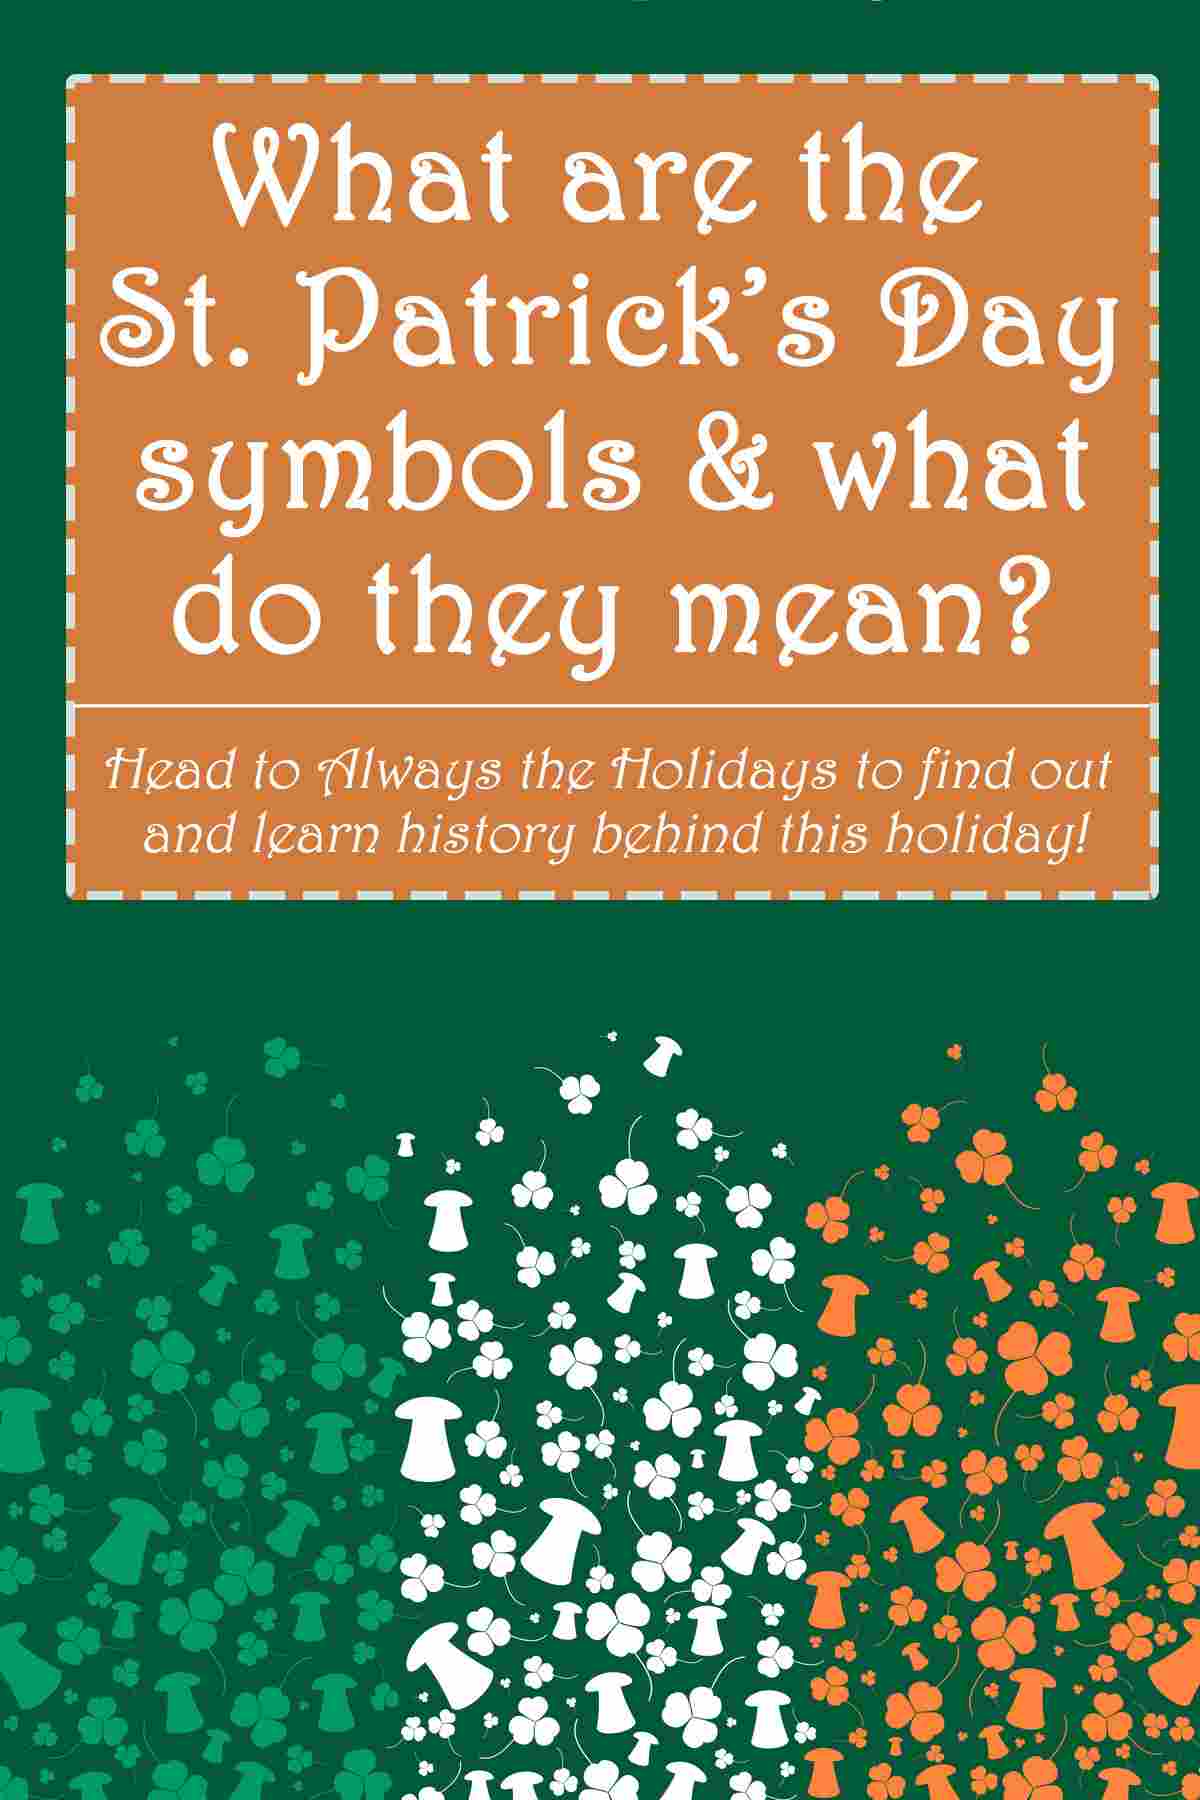 A green background with an Irish flag made of tiny shamrocks and leprechaun hats at the bottom and a text overlay that reads "What are the St. Patrick's Day symbols and what do they mean?".